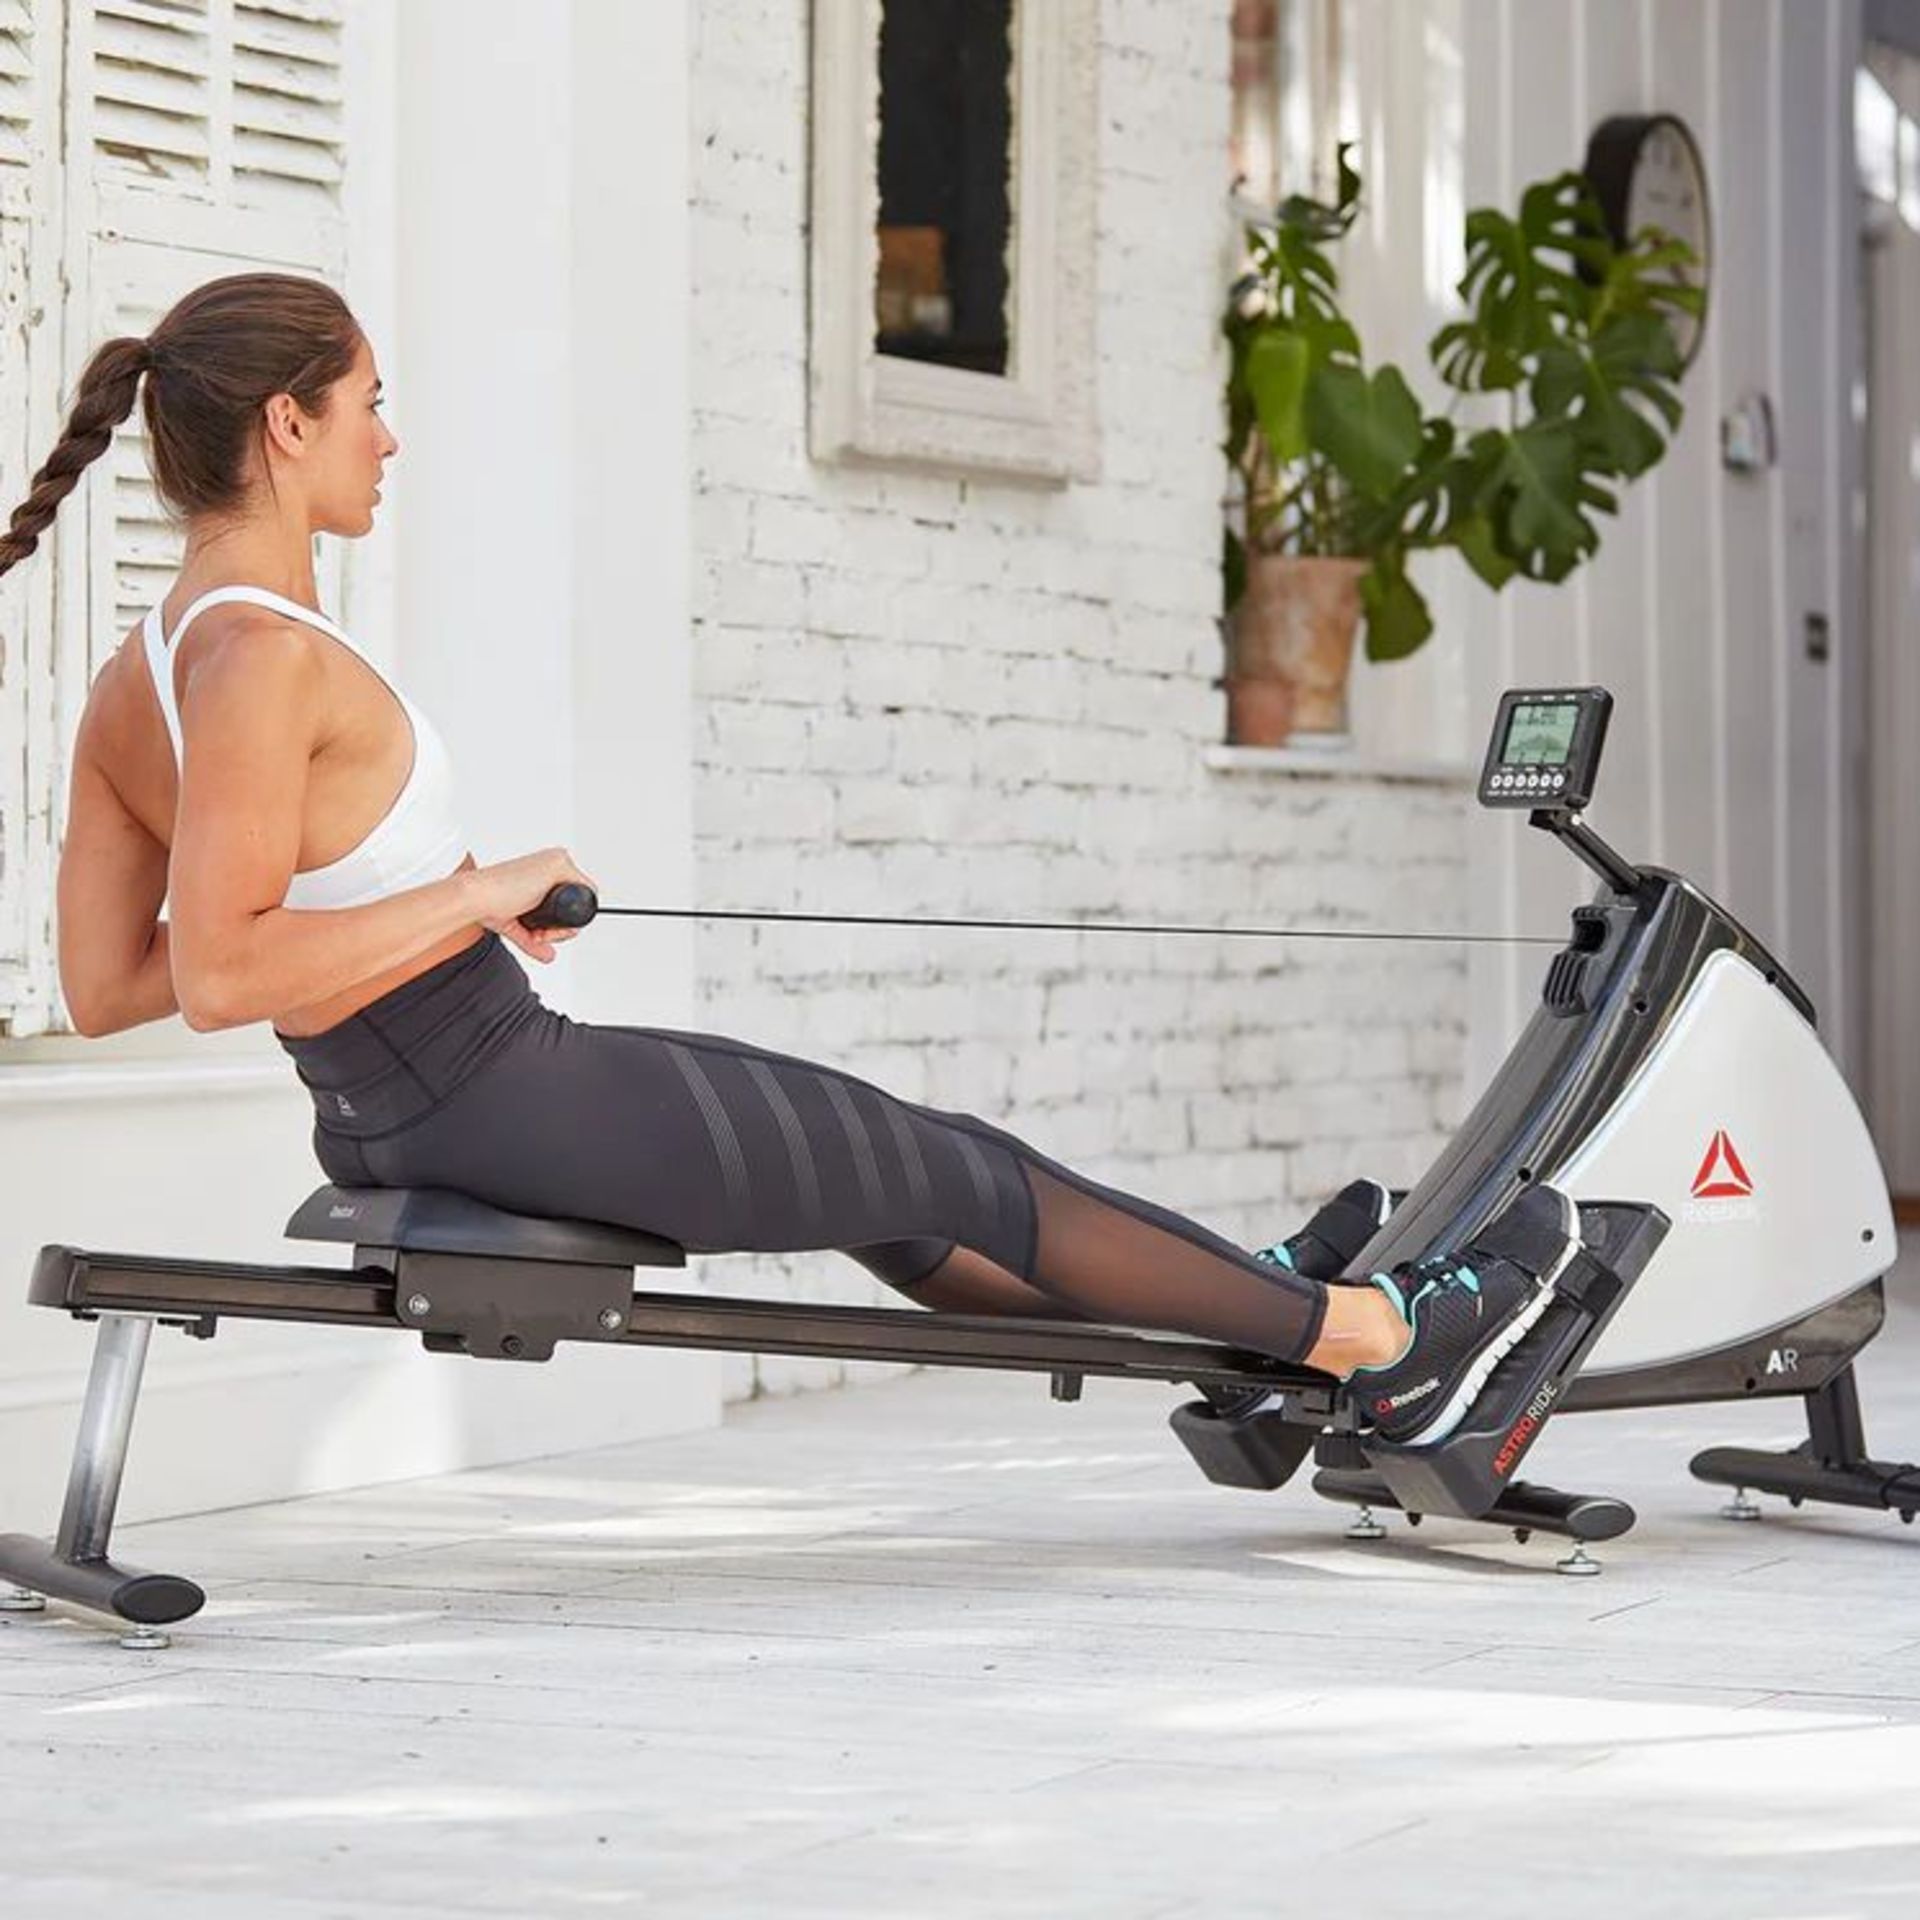 BRAND NEW REEBOK AR Rower. RRP £514.99 EACH R9-8. Designed for you to create more effective and - Image 4 of 4